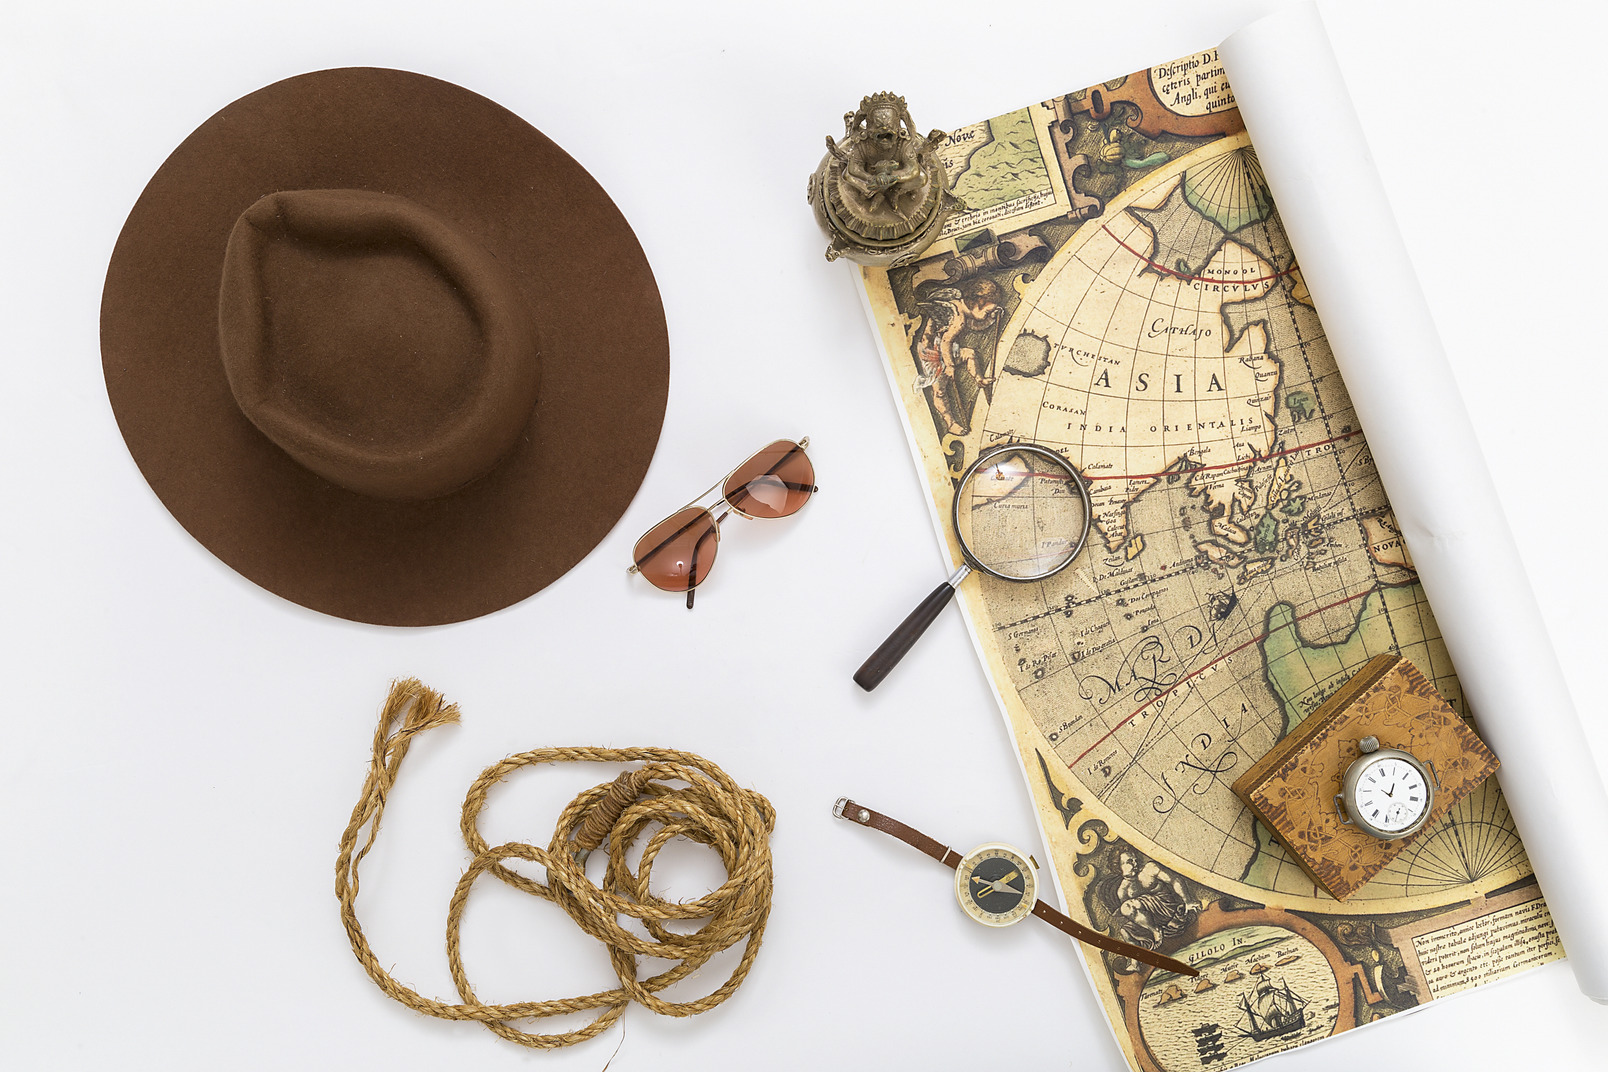 Tweed hat, map, sunglasses, rope, magnifying glass and compass